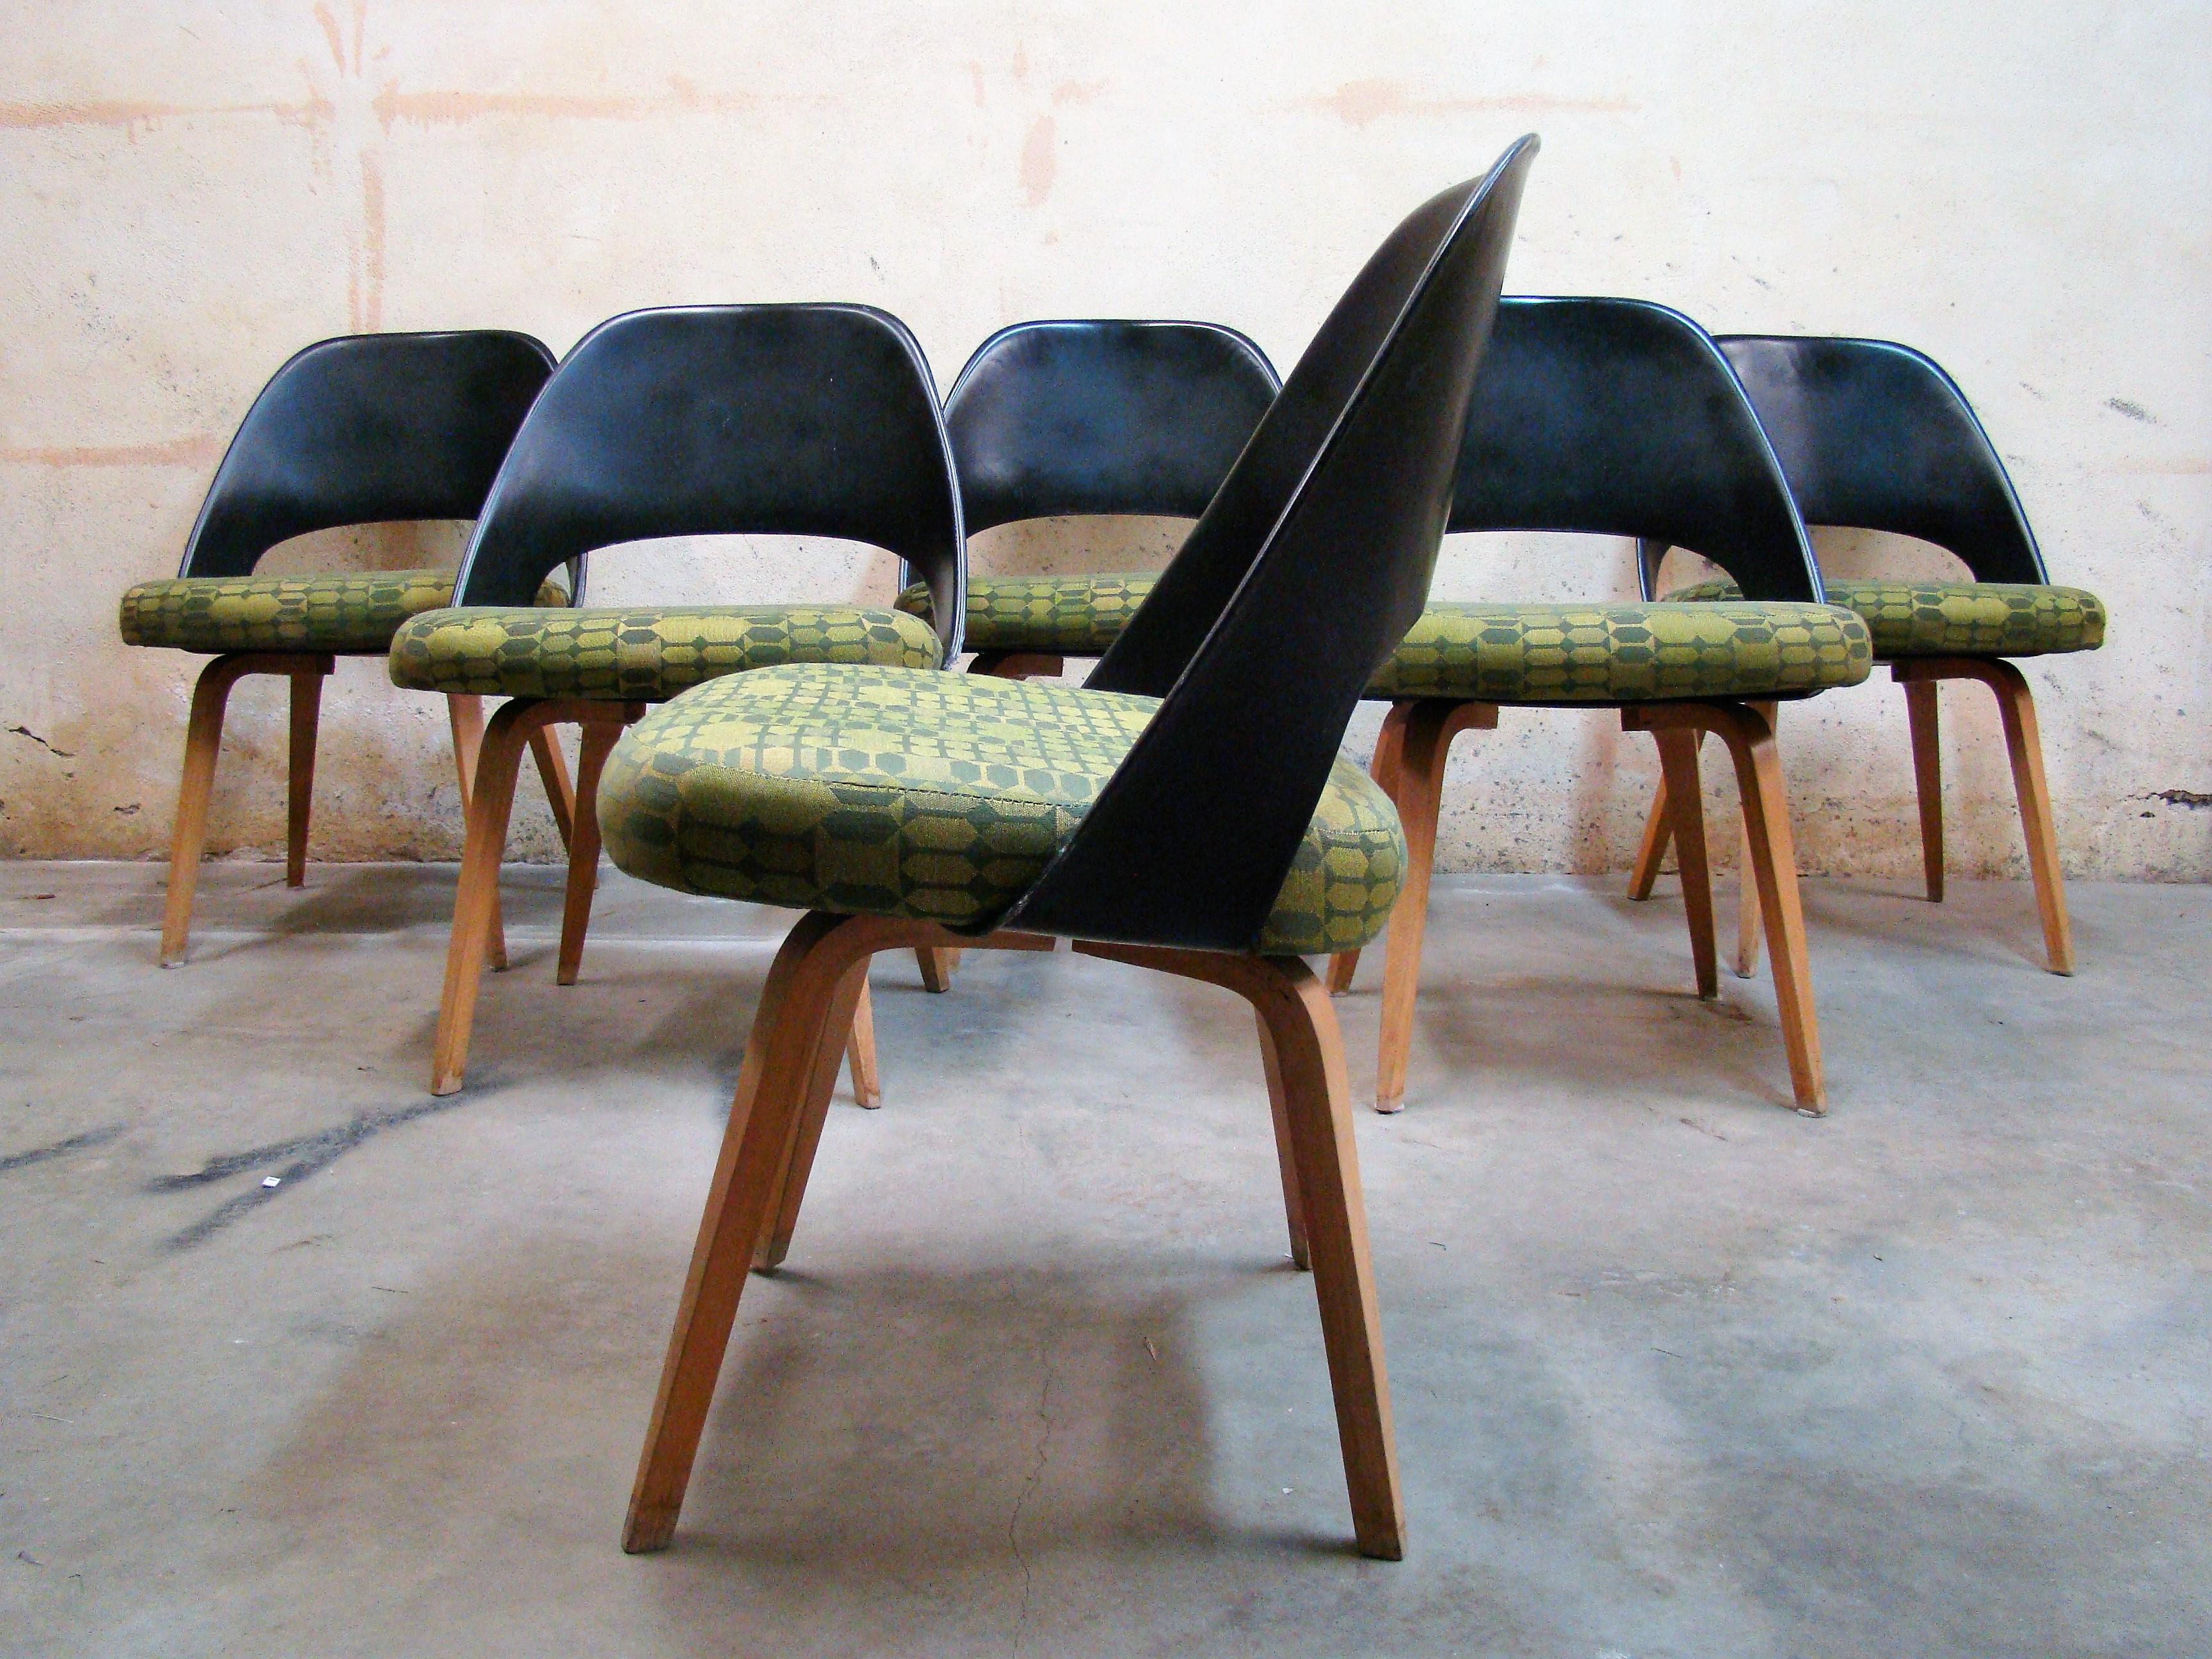 Upholstery Dining Chairs Designed by Eero Saarinen for Knoll Associates 'only 4 available'